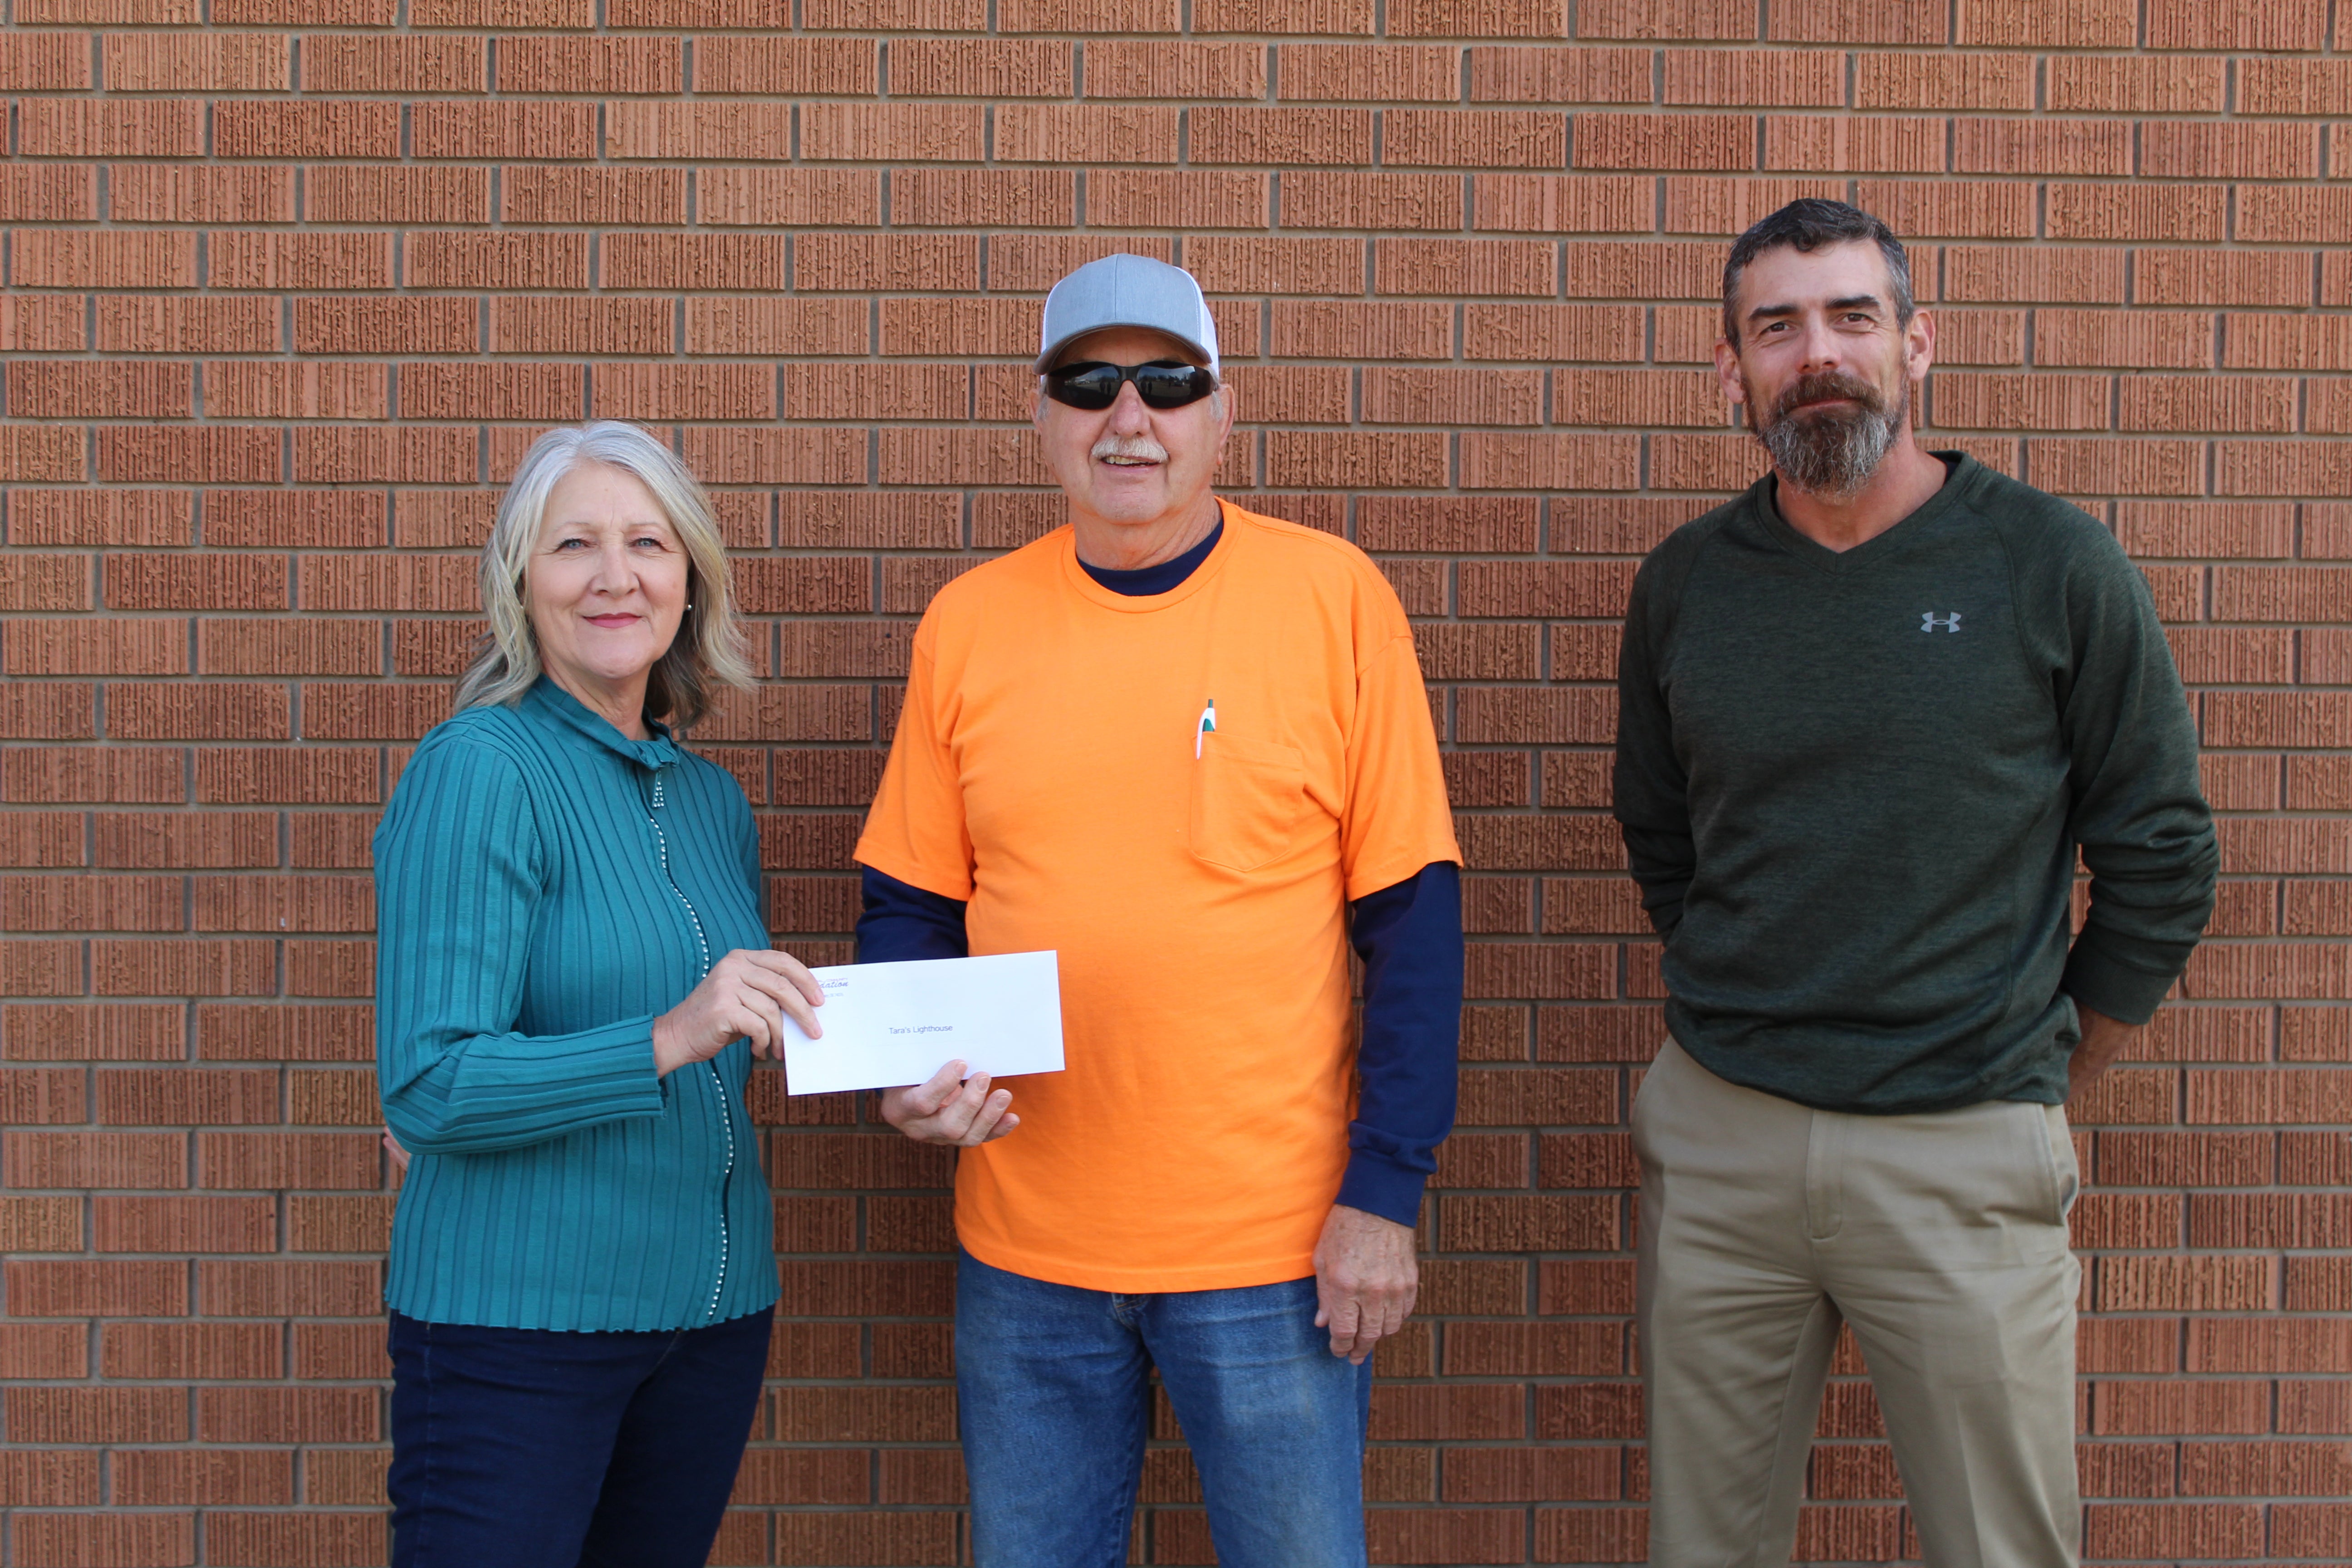 Central District 6 Trustee James Well (right) and Central Community Foundation Board Member Gail Cookerly (left) present a grant to Tara’s Lighthouse board member Randy Brown.